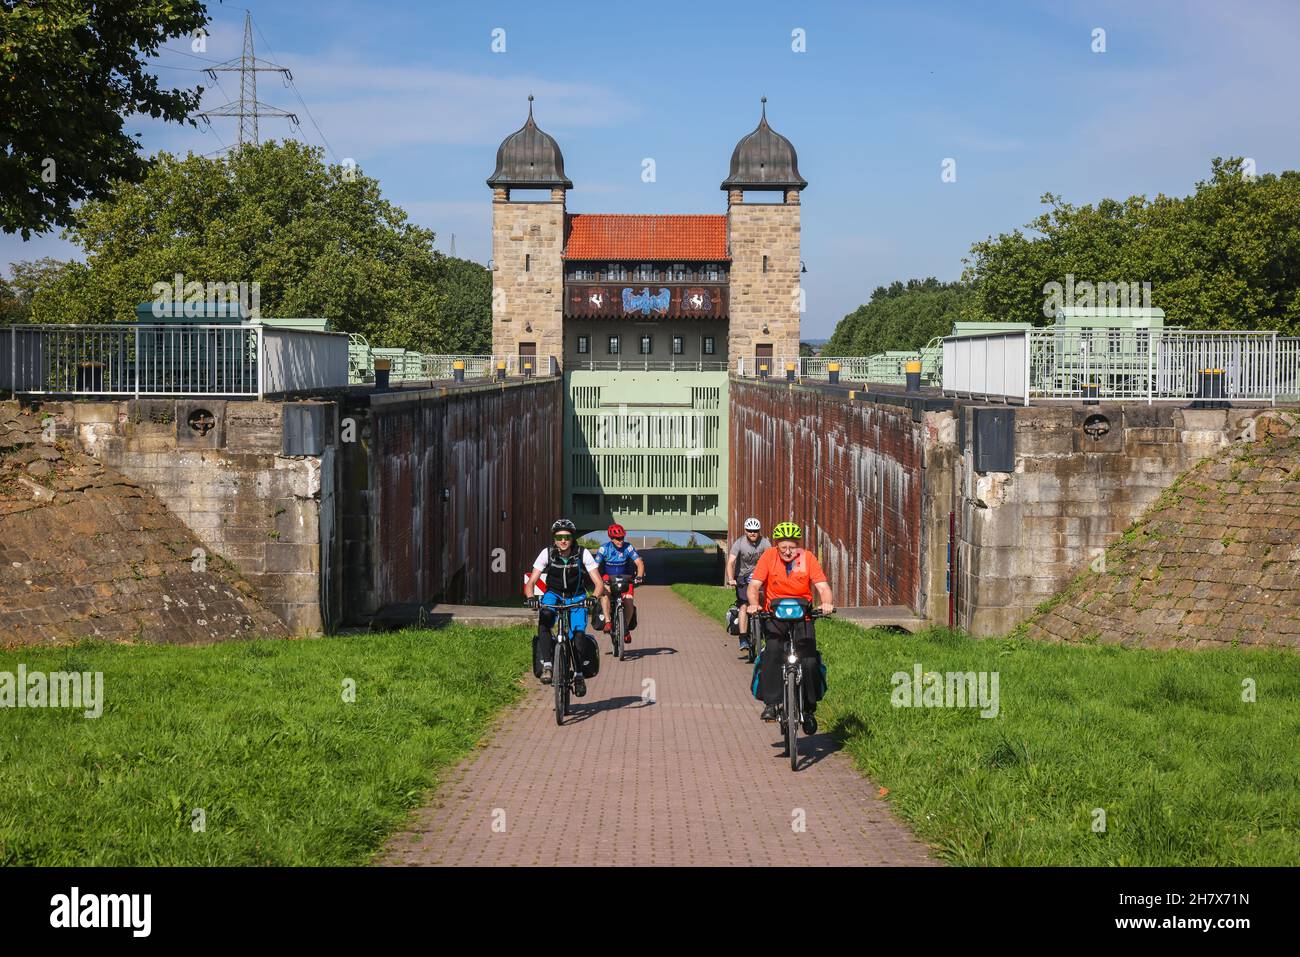 Waltrop, North Rhine-Westphalia, Germany - Ship lift and lock park Waltrop. Here the disused Old Shaft Lock is now used as a pedestrian and bicycle pa Stock Photo